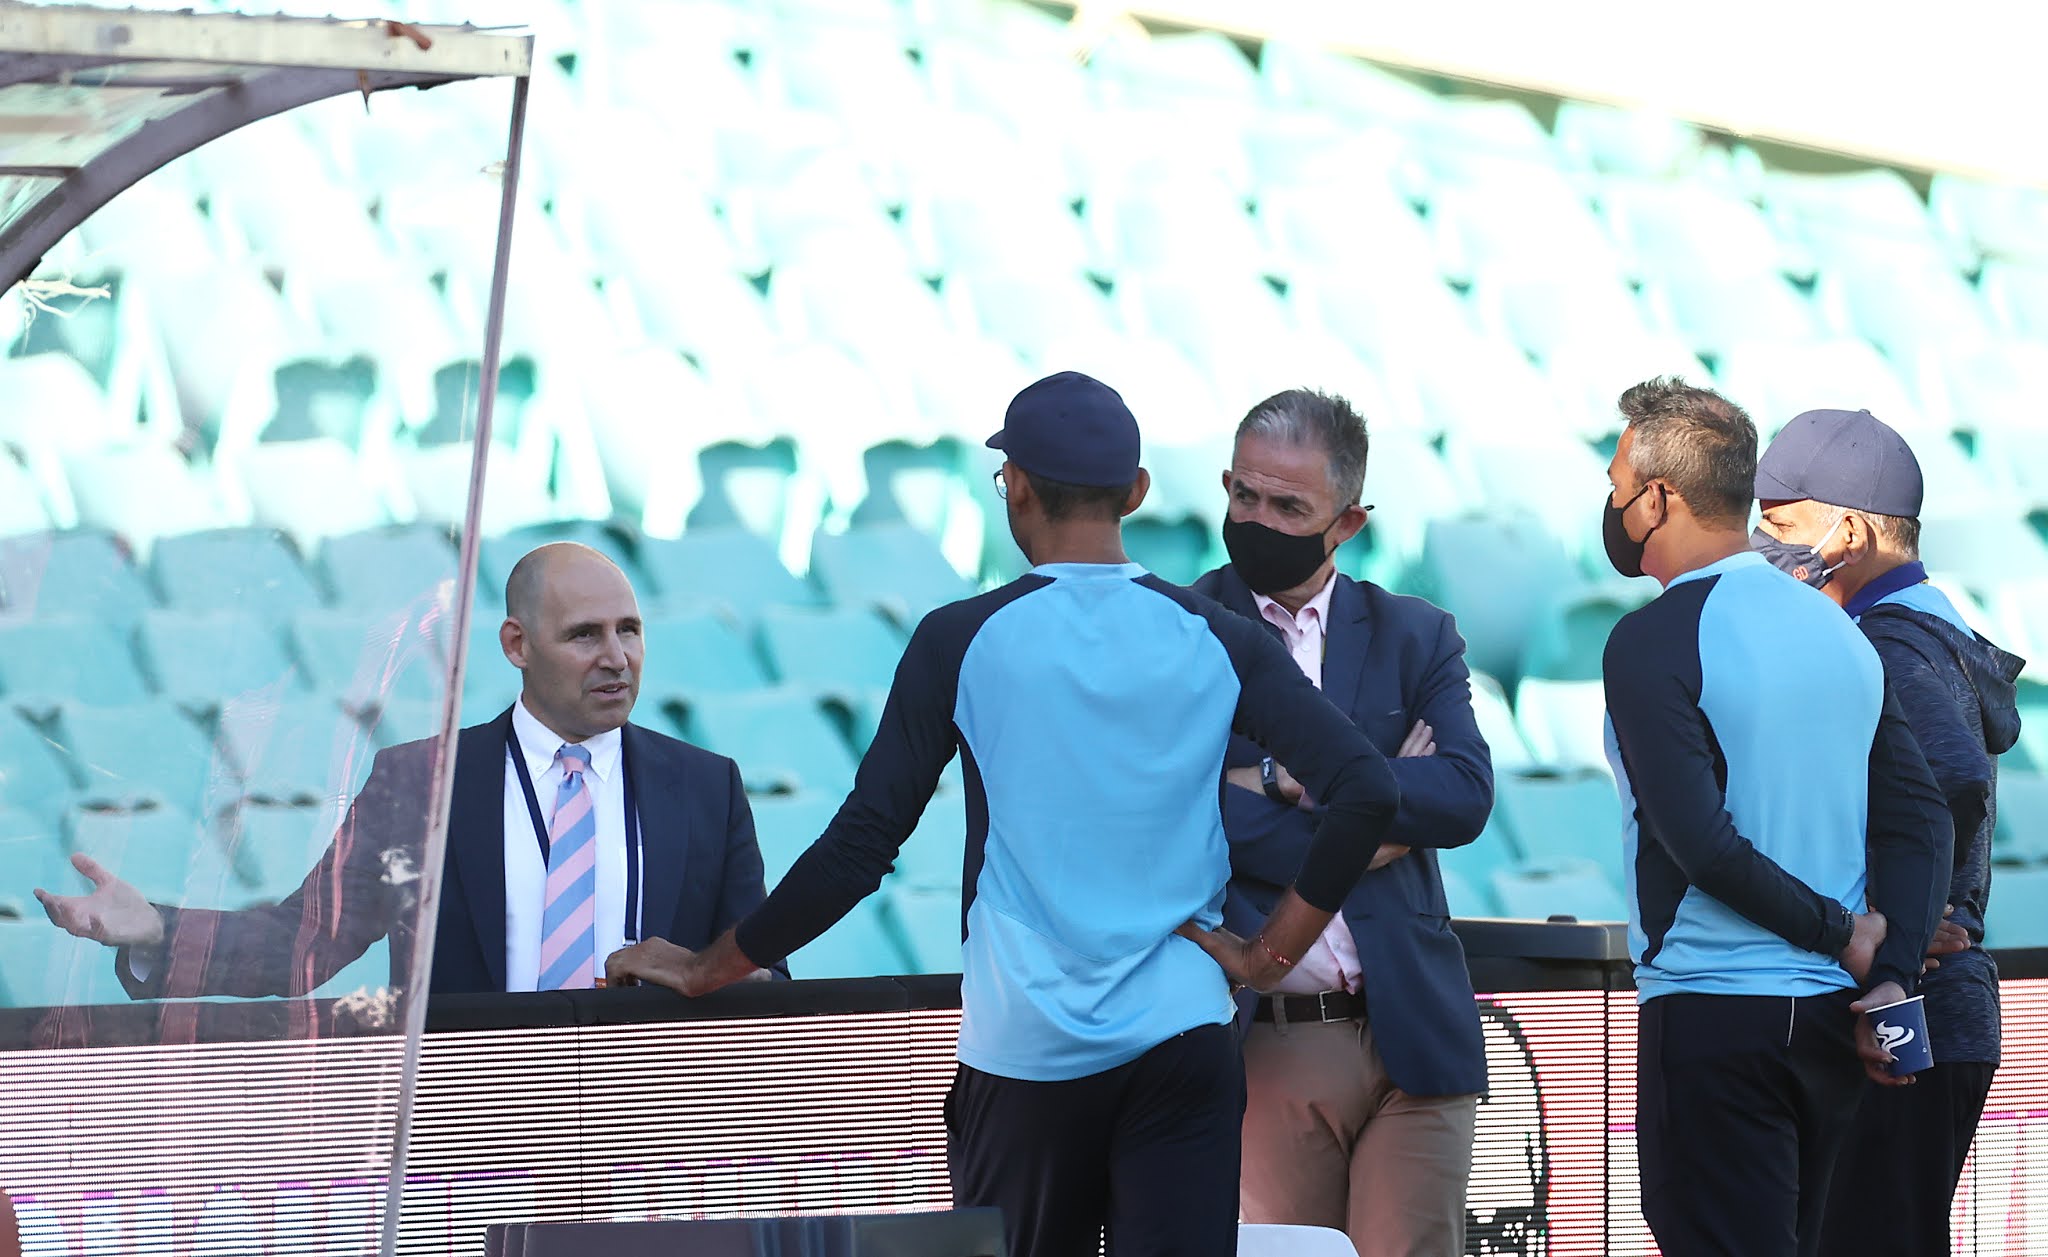 CA CEO Nick Hockley and CA Head of Integrity and Security Sean Carroll speak with Indian team management | Getty